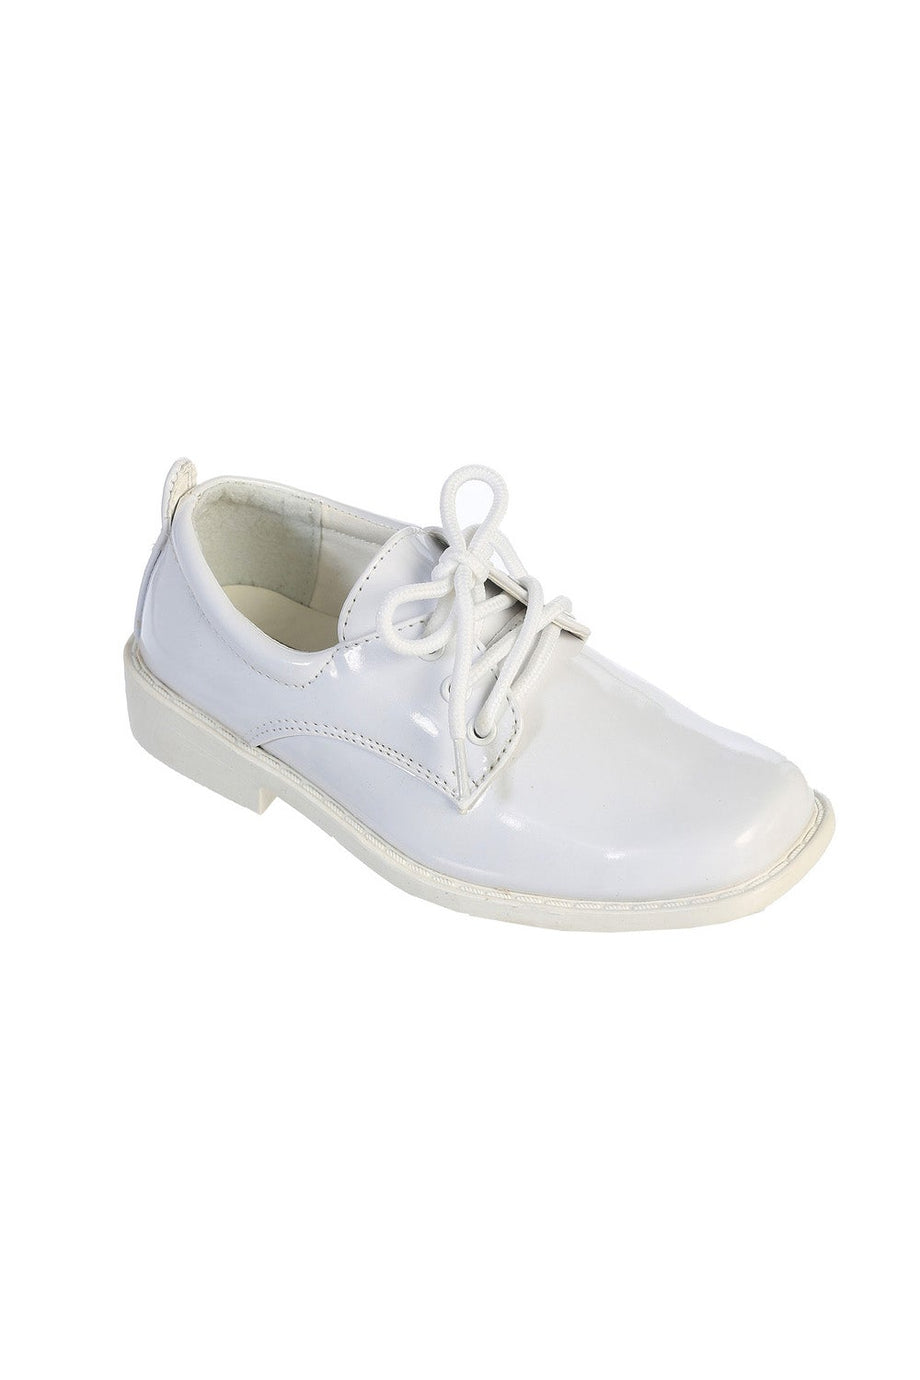 Tip Top "Lincoln" Kids White Square Toe Lace Up Tuxedo Shoes